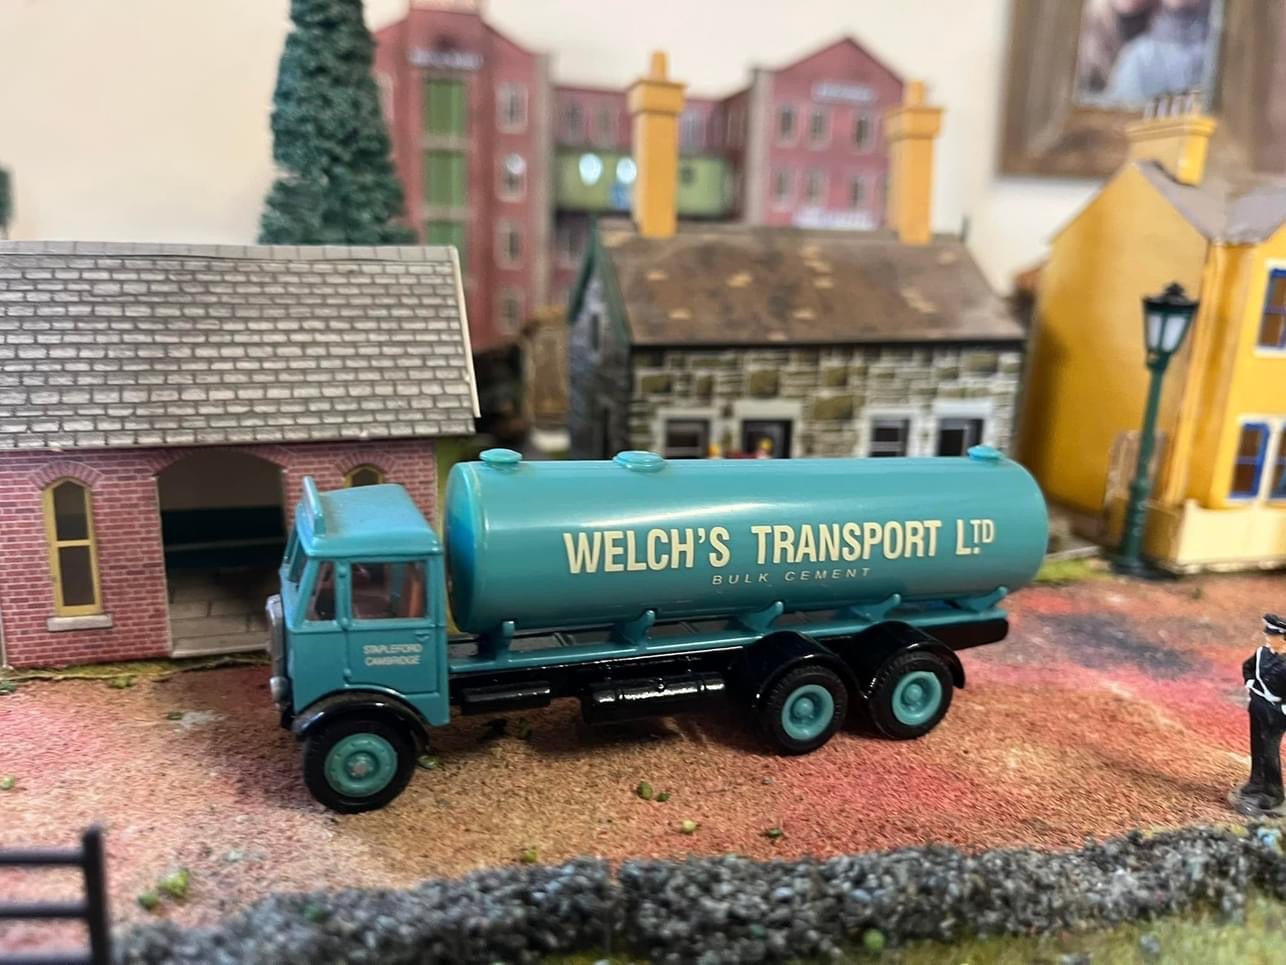 EFE, AEC Mammoth Major, Cement Carrier, in Welch’s Transport Ltd, 1:76 scale.